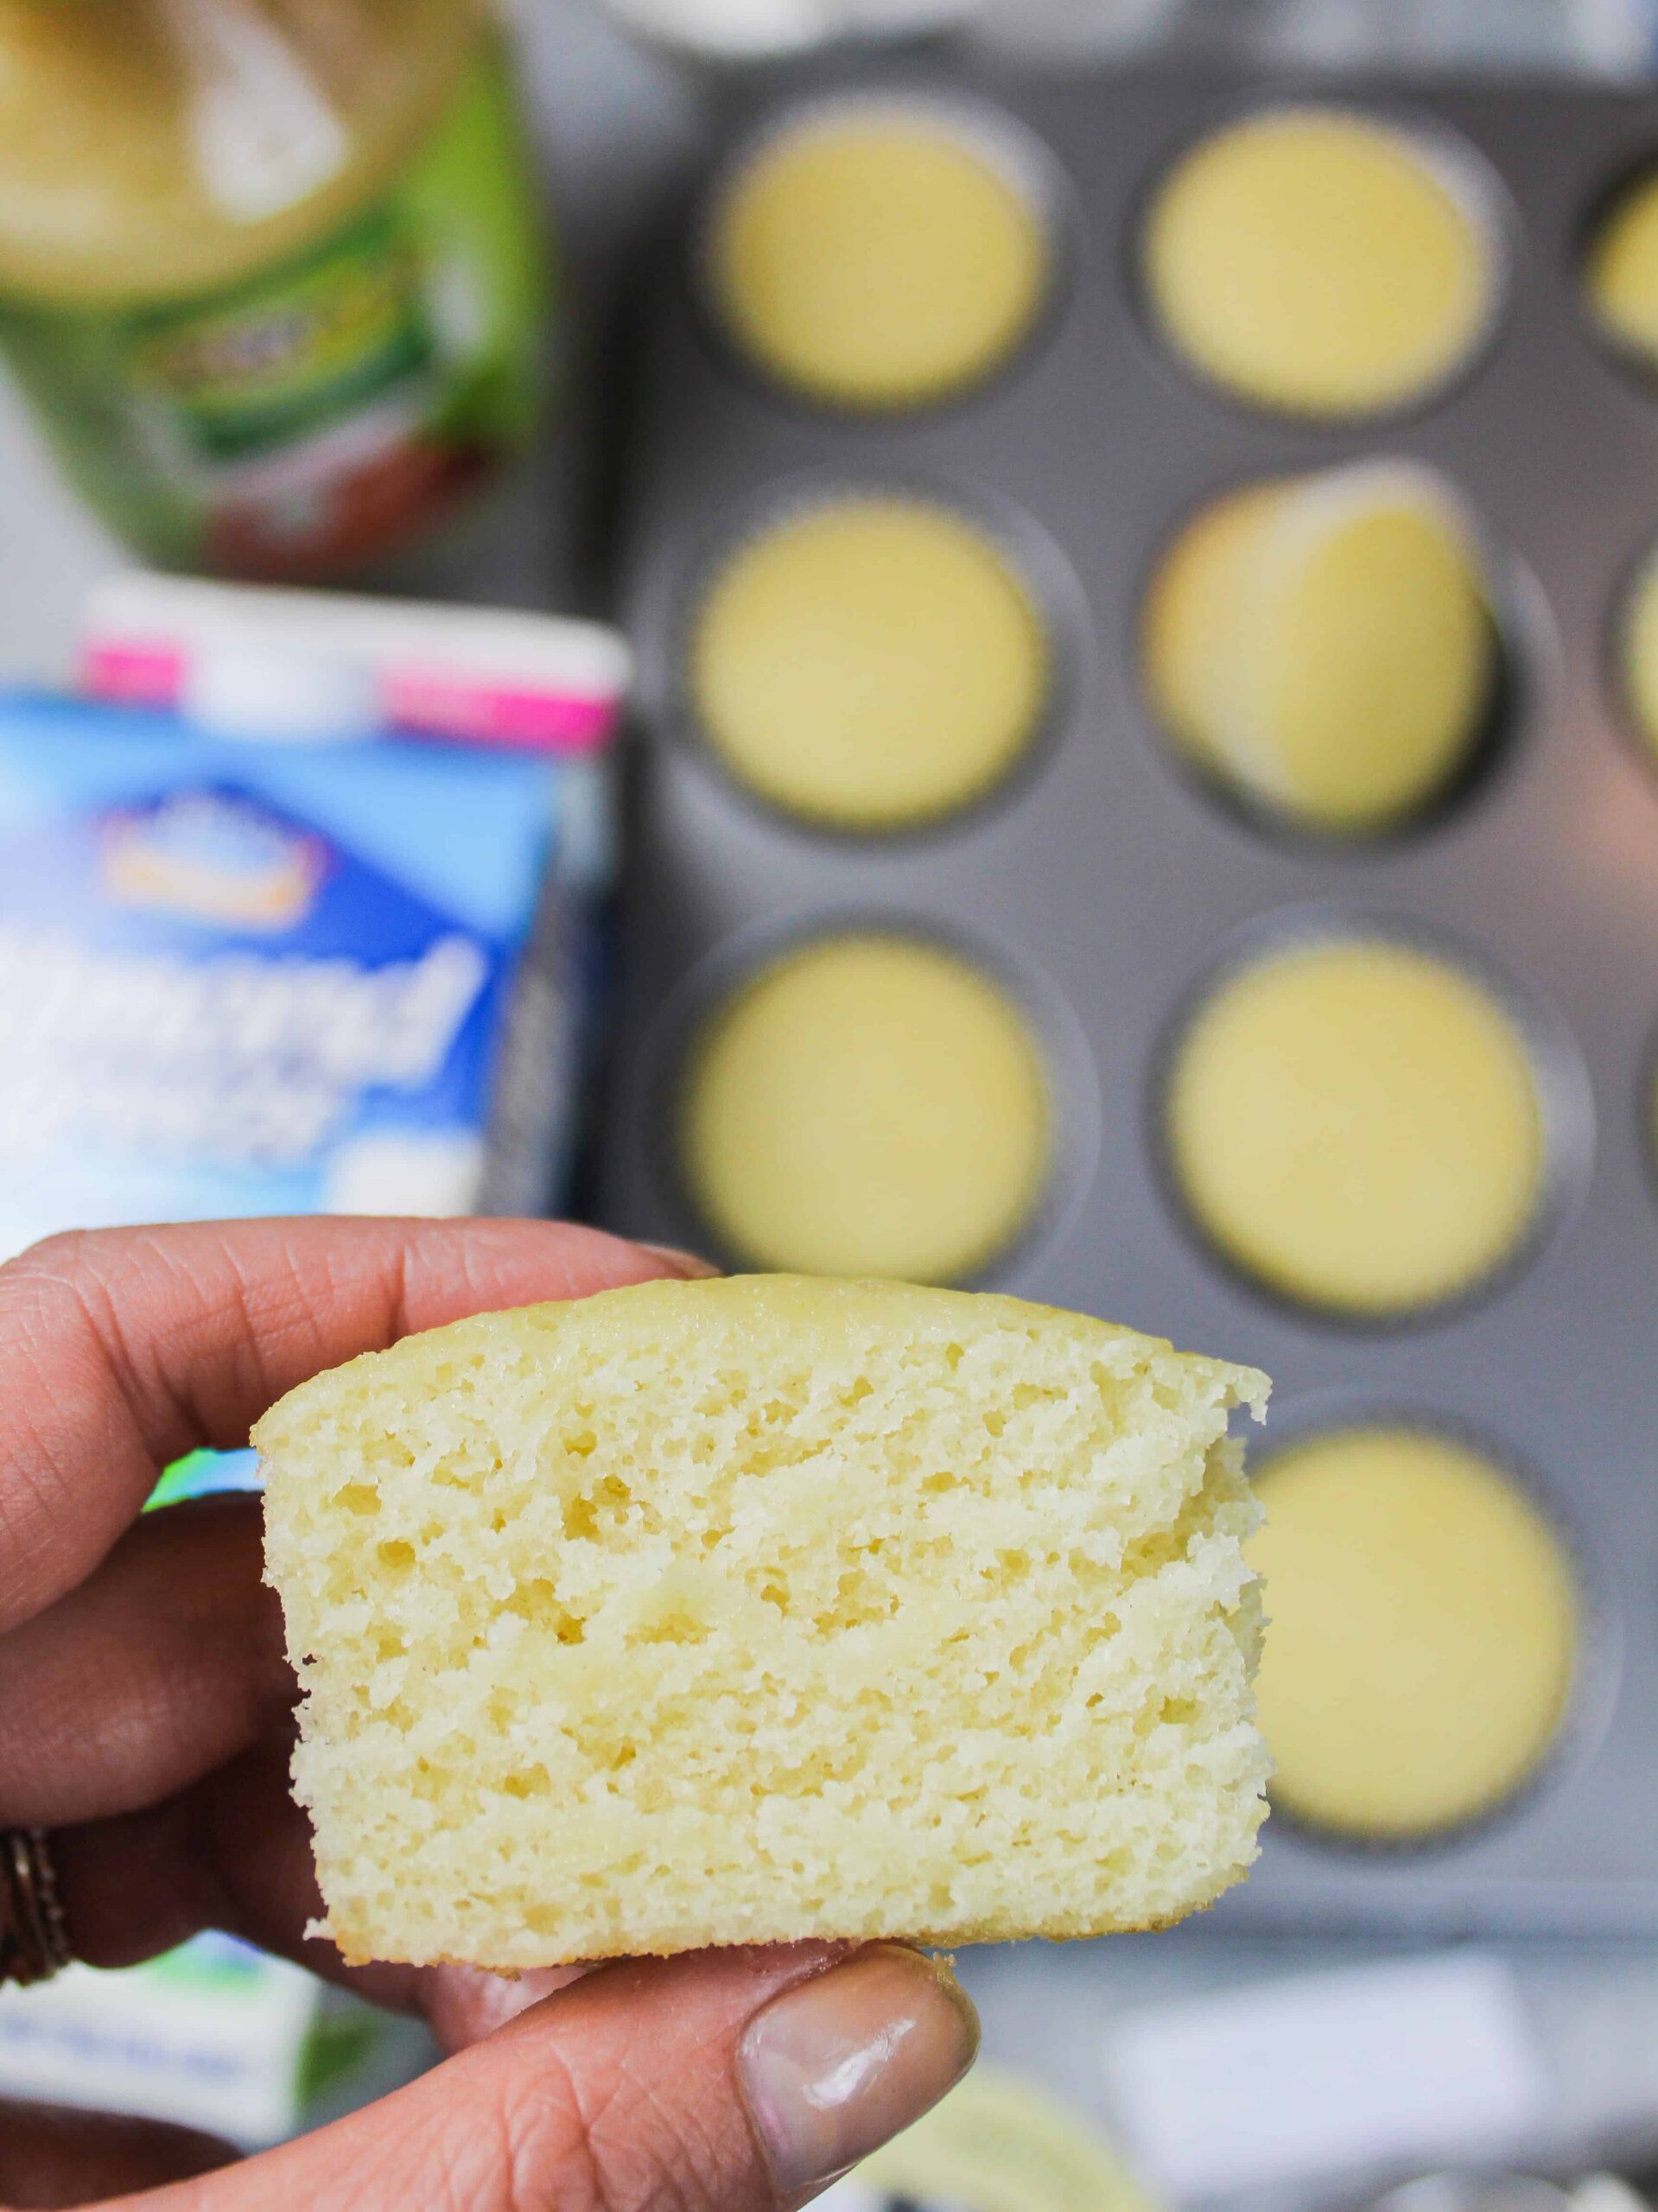 eggless cupcake baked with applesauce in place in eggs